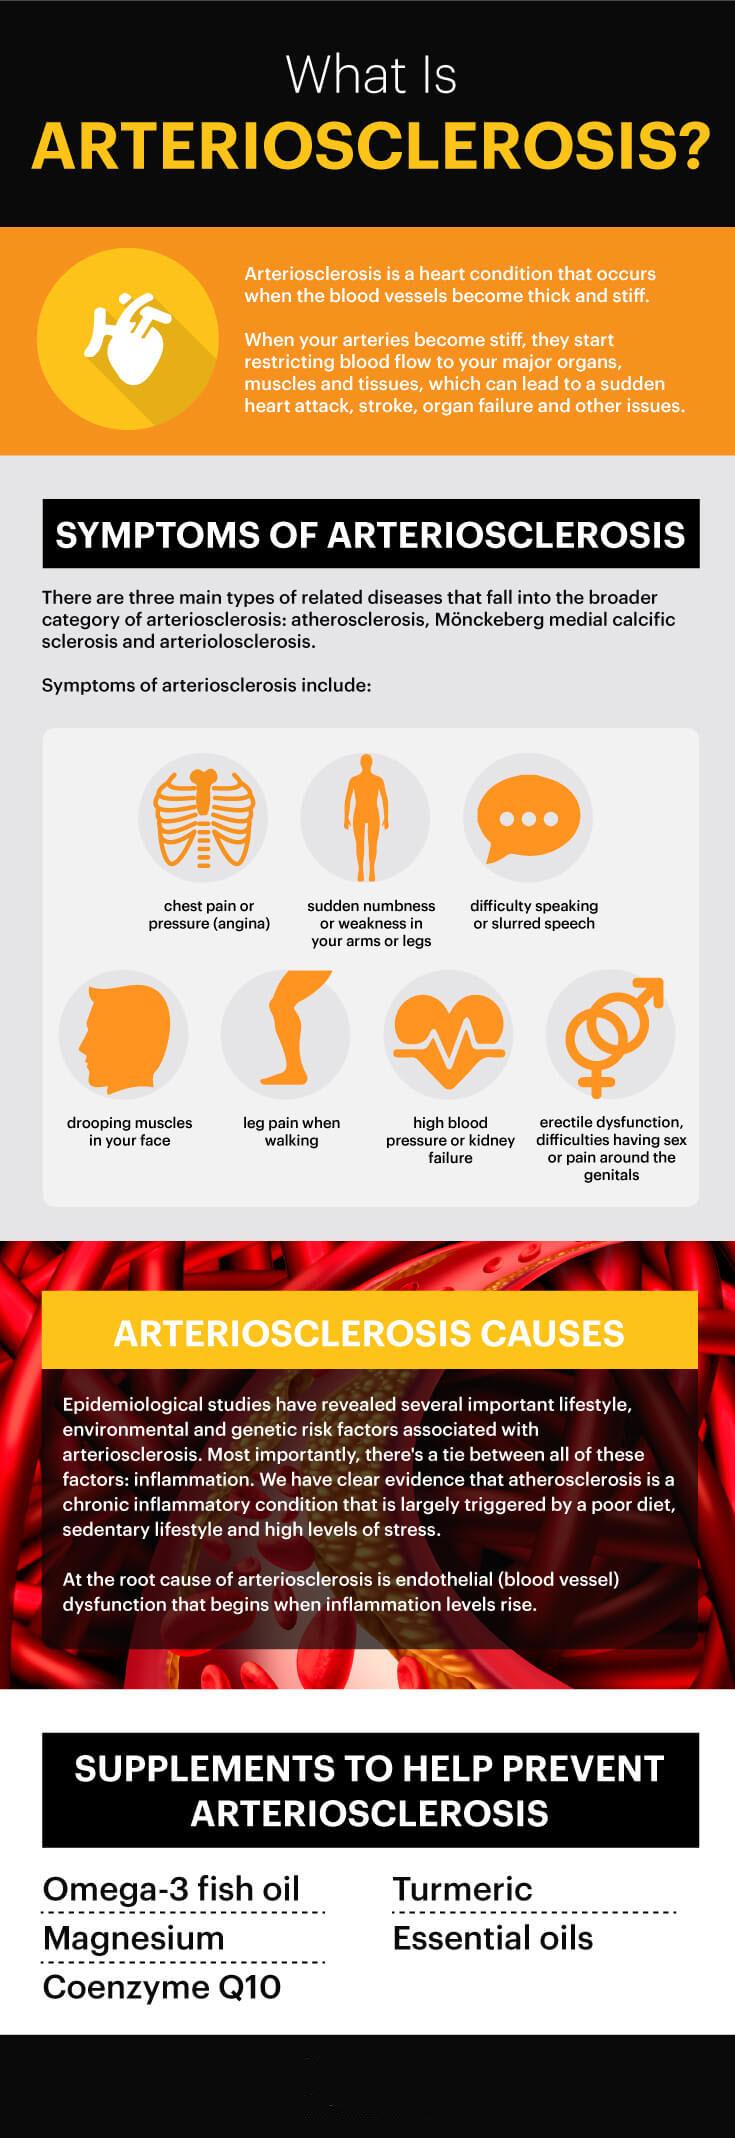 Arteriosclerosis - what is it